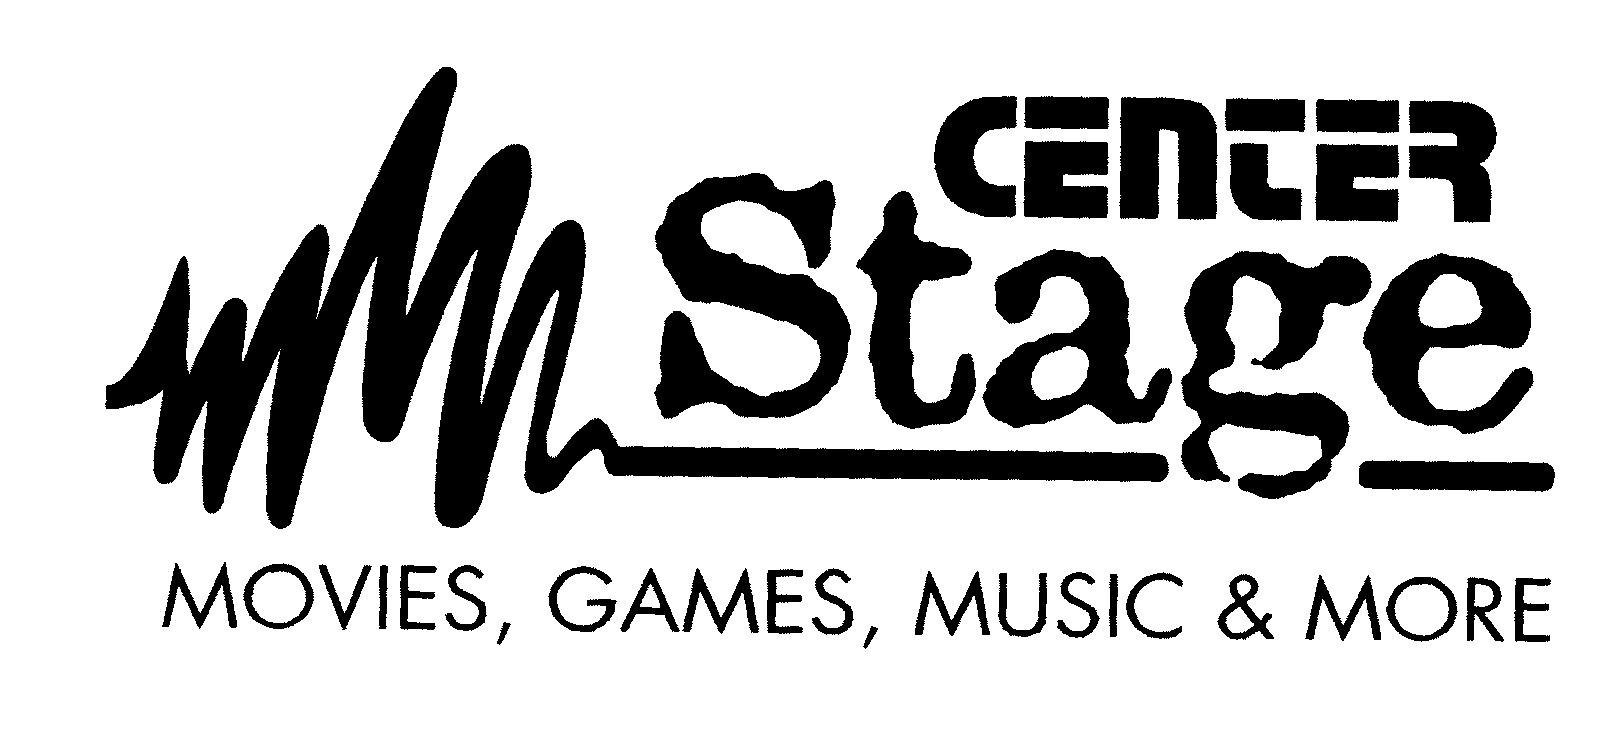  CENTER STAGE MOVIES, GAMES, MUSIC &amp; MORE